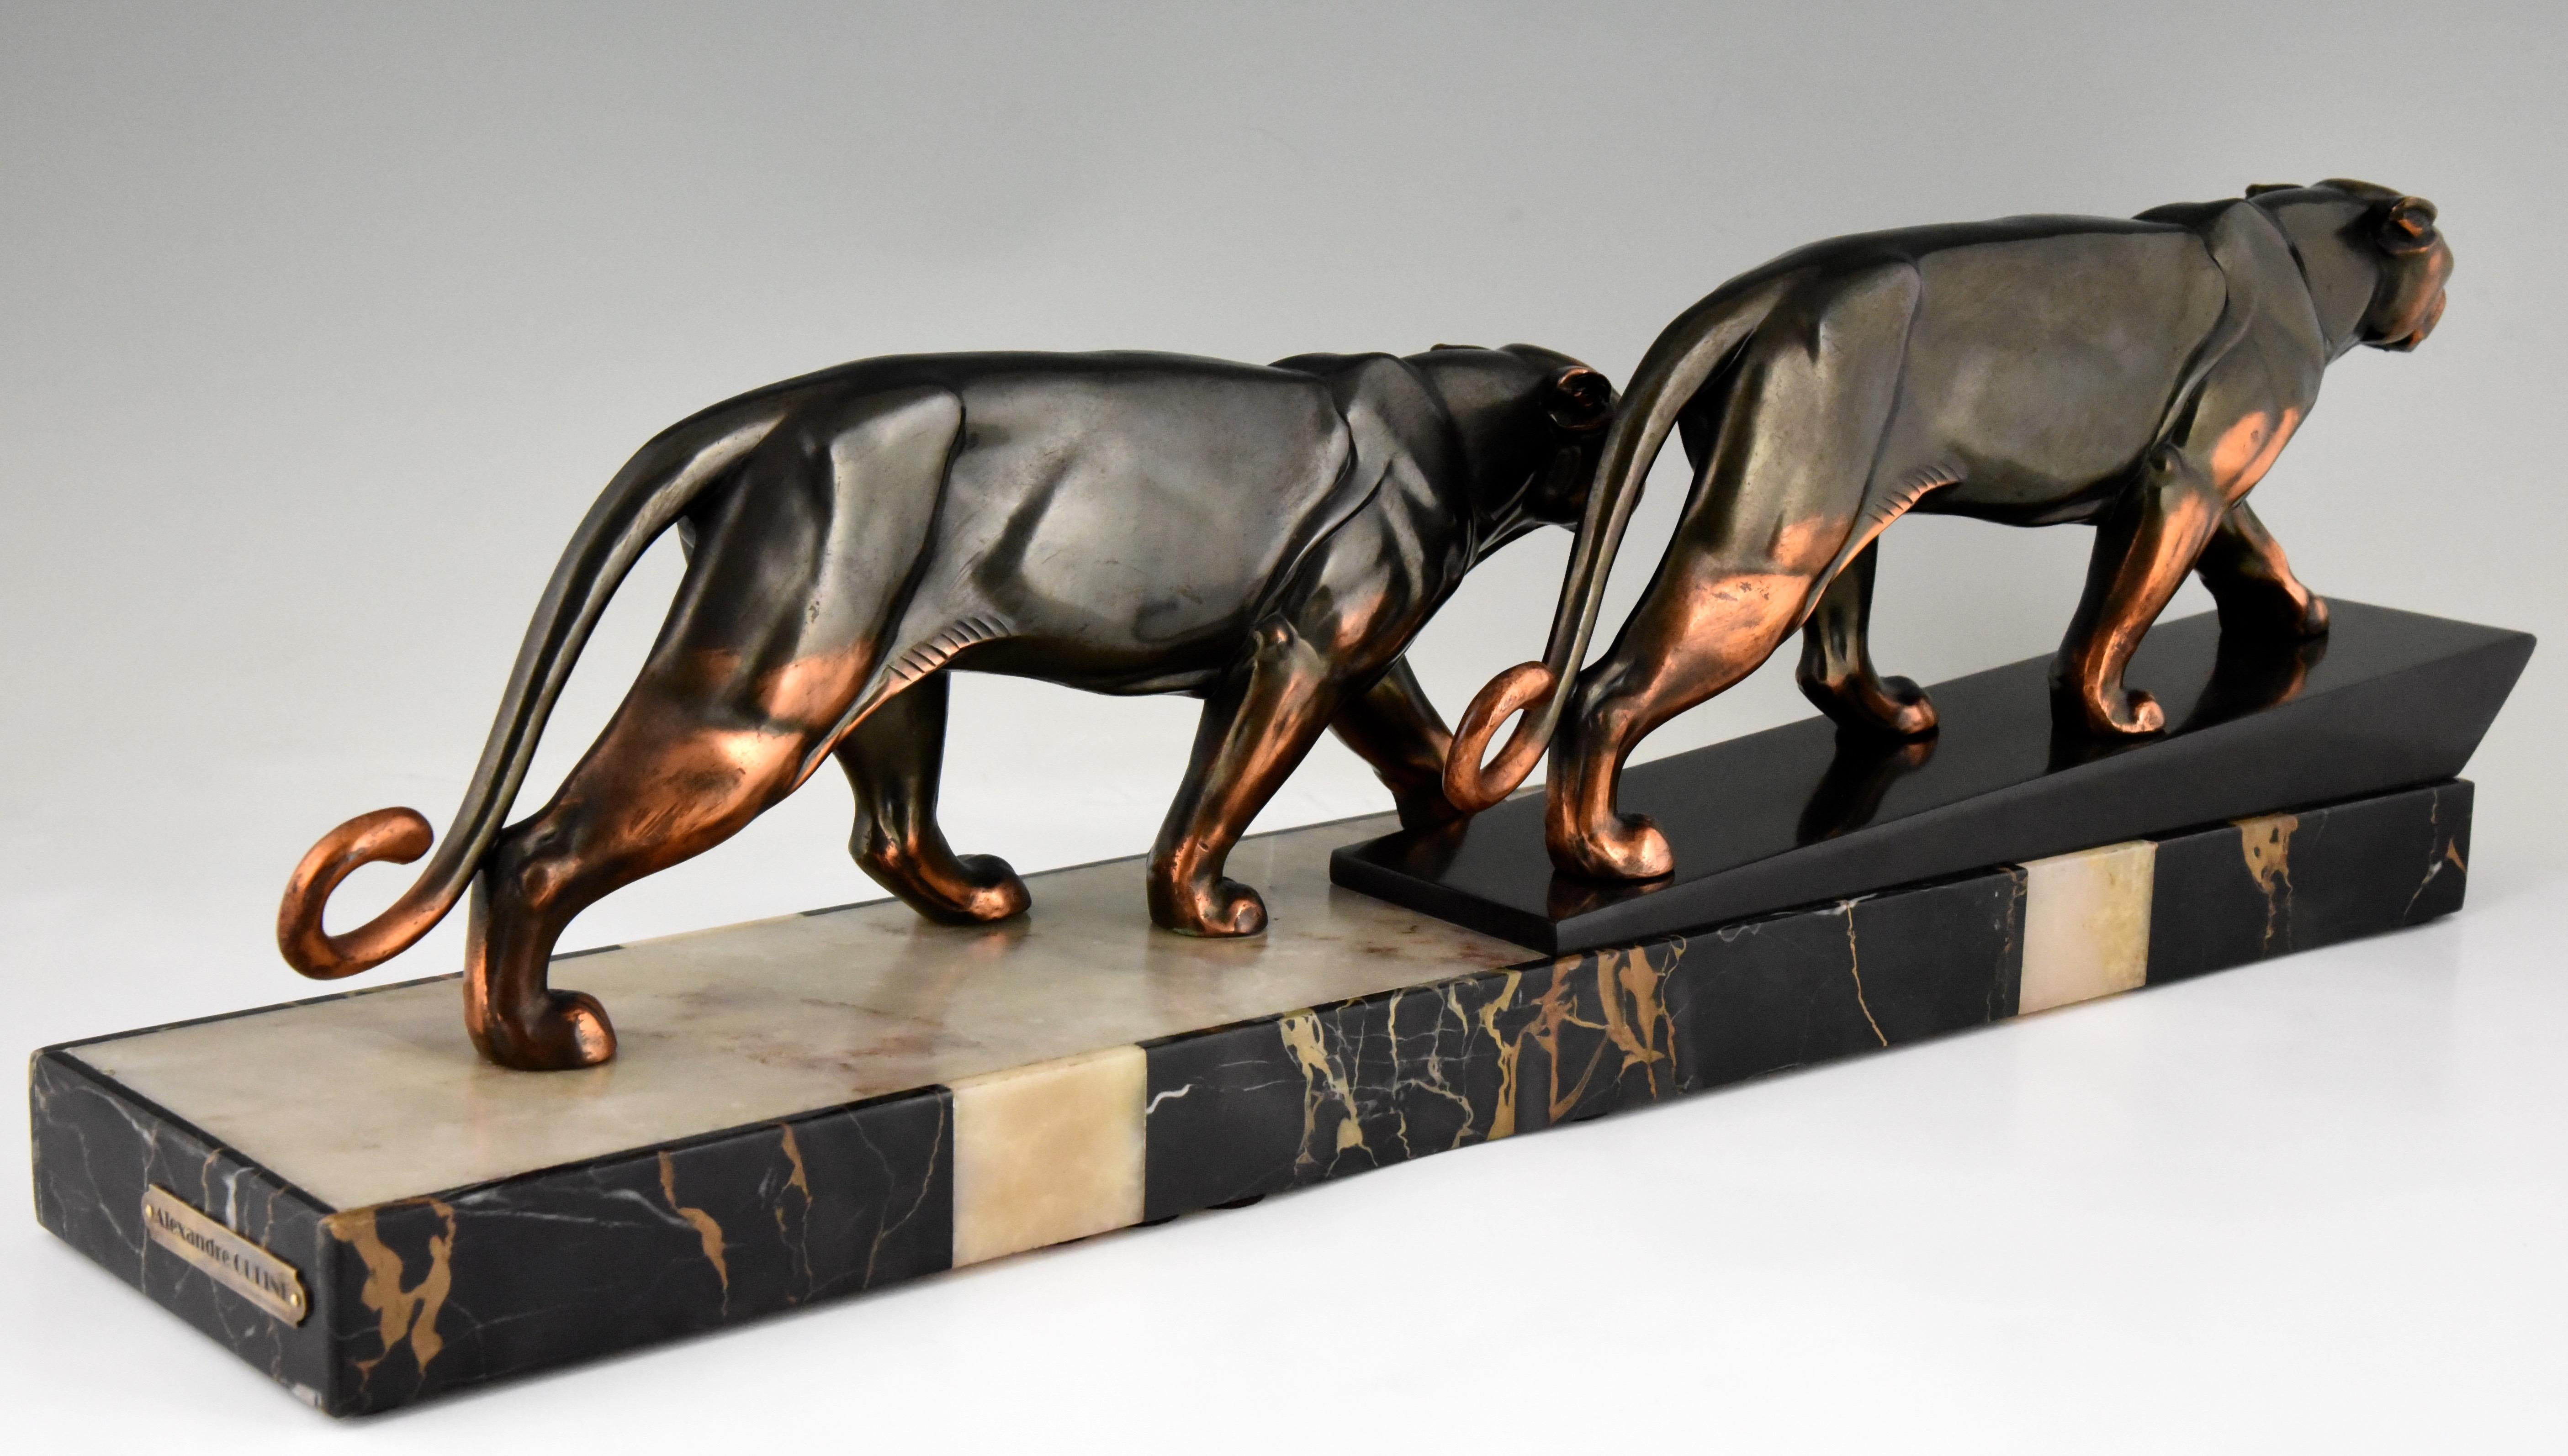 Metal Art Deco Sculpture of Two Panthers Alexandre Ouline, France, 1930